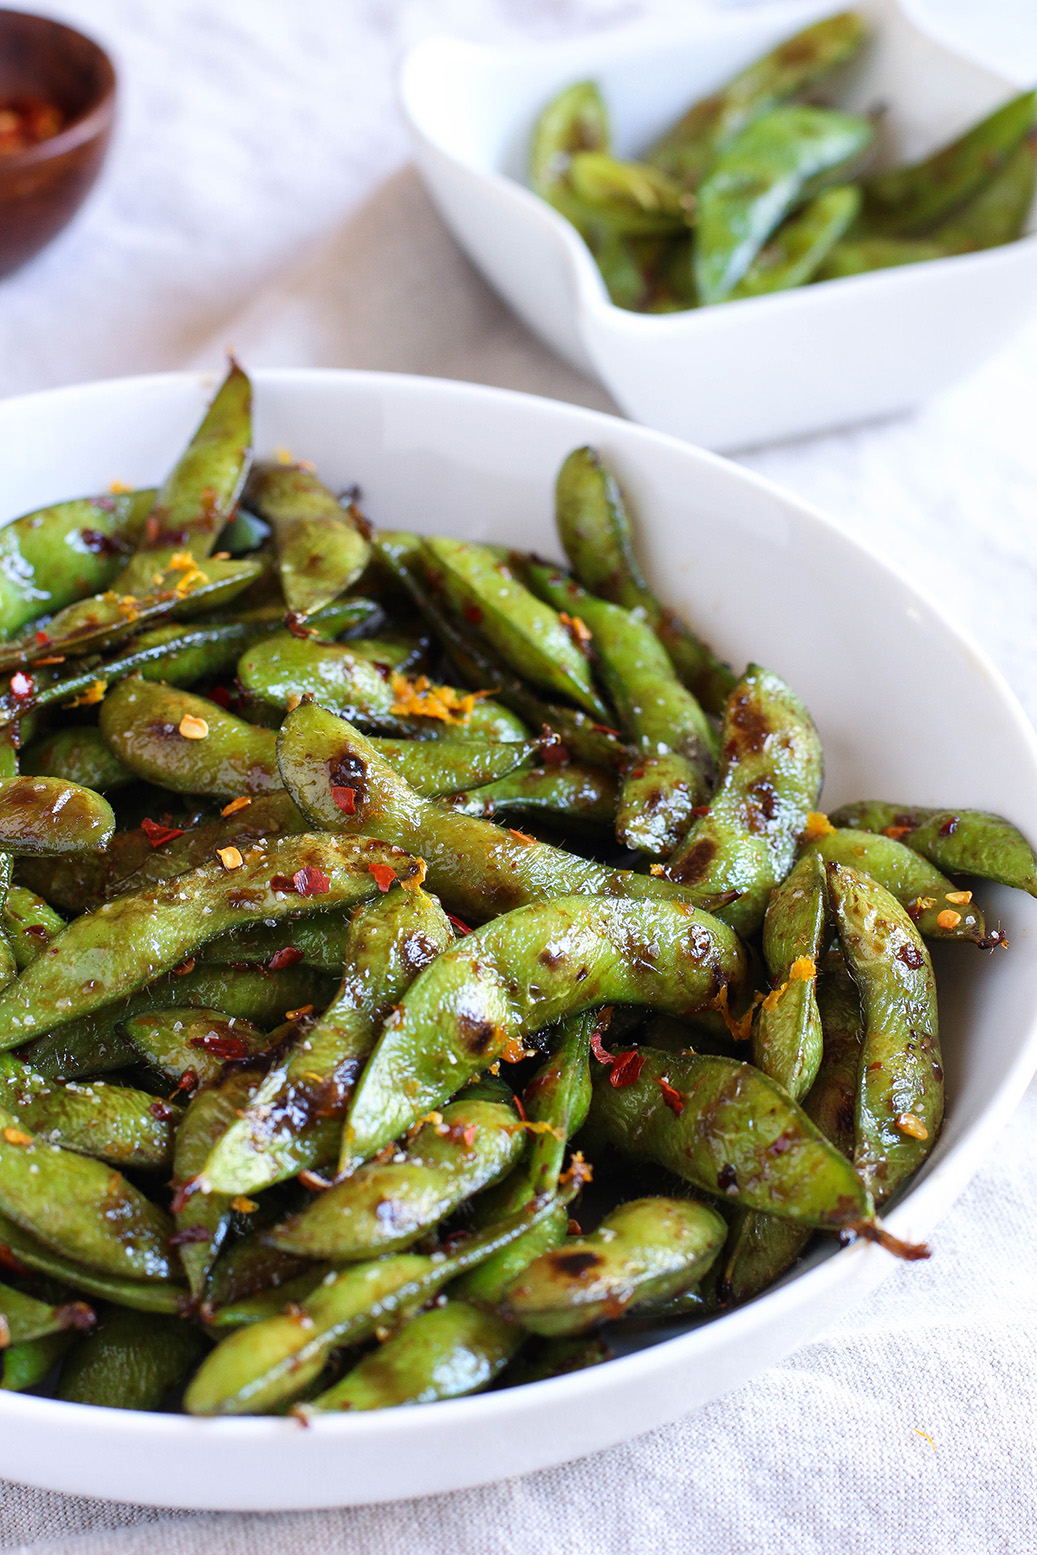 15 Minute Orange Spiced Edamame - a healthy & protein packed snack